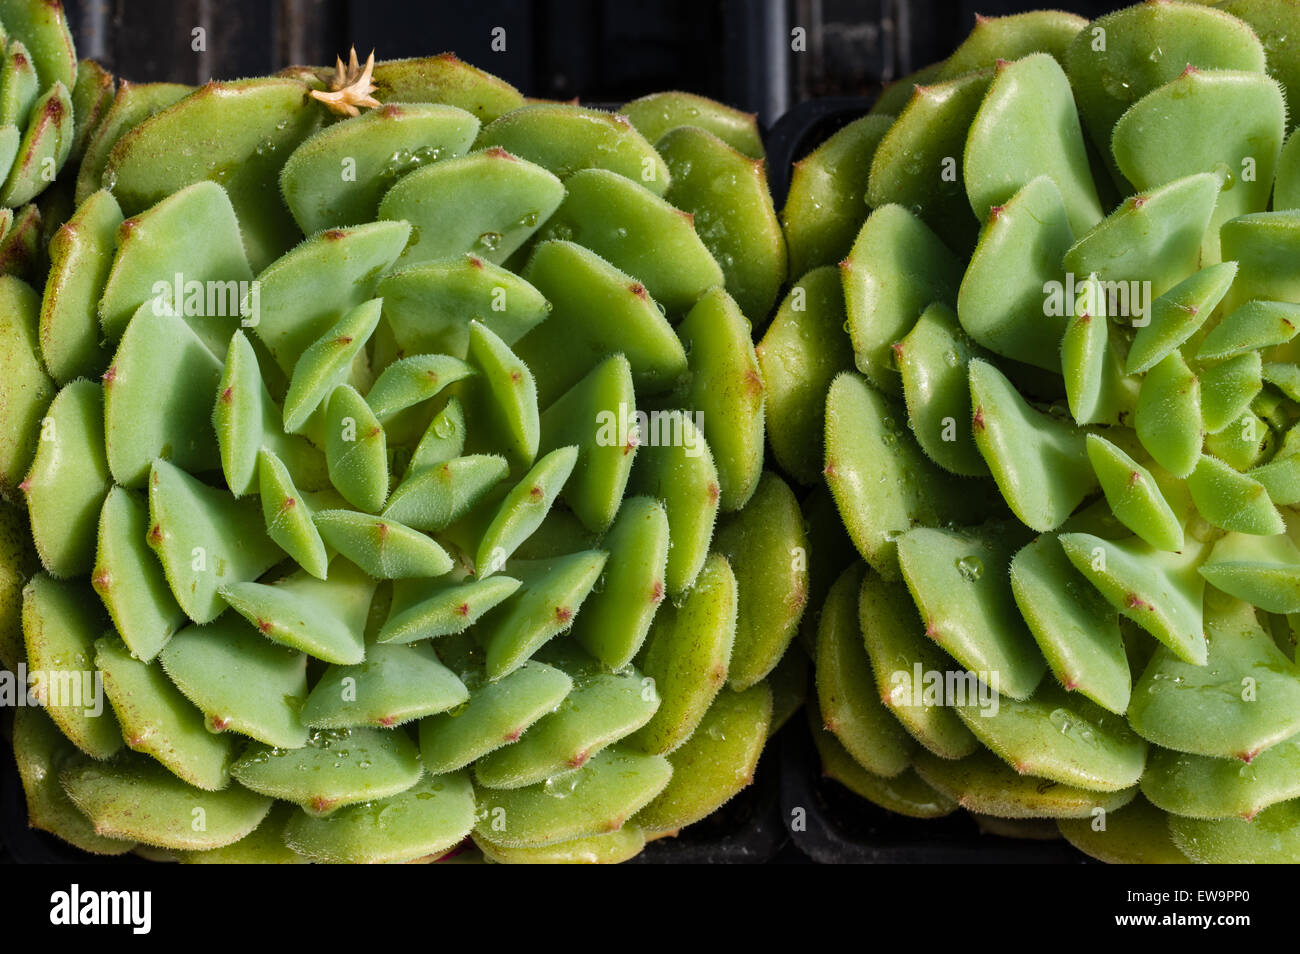 A sedum plant showing a tightly grown rosette of leaves Stock Photo